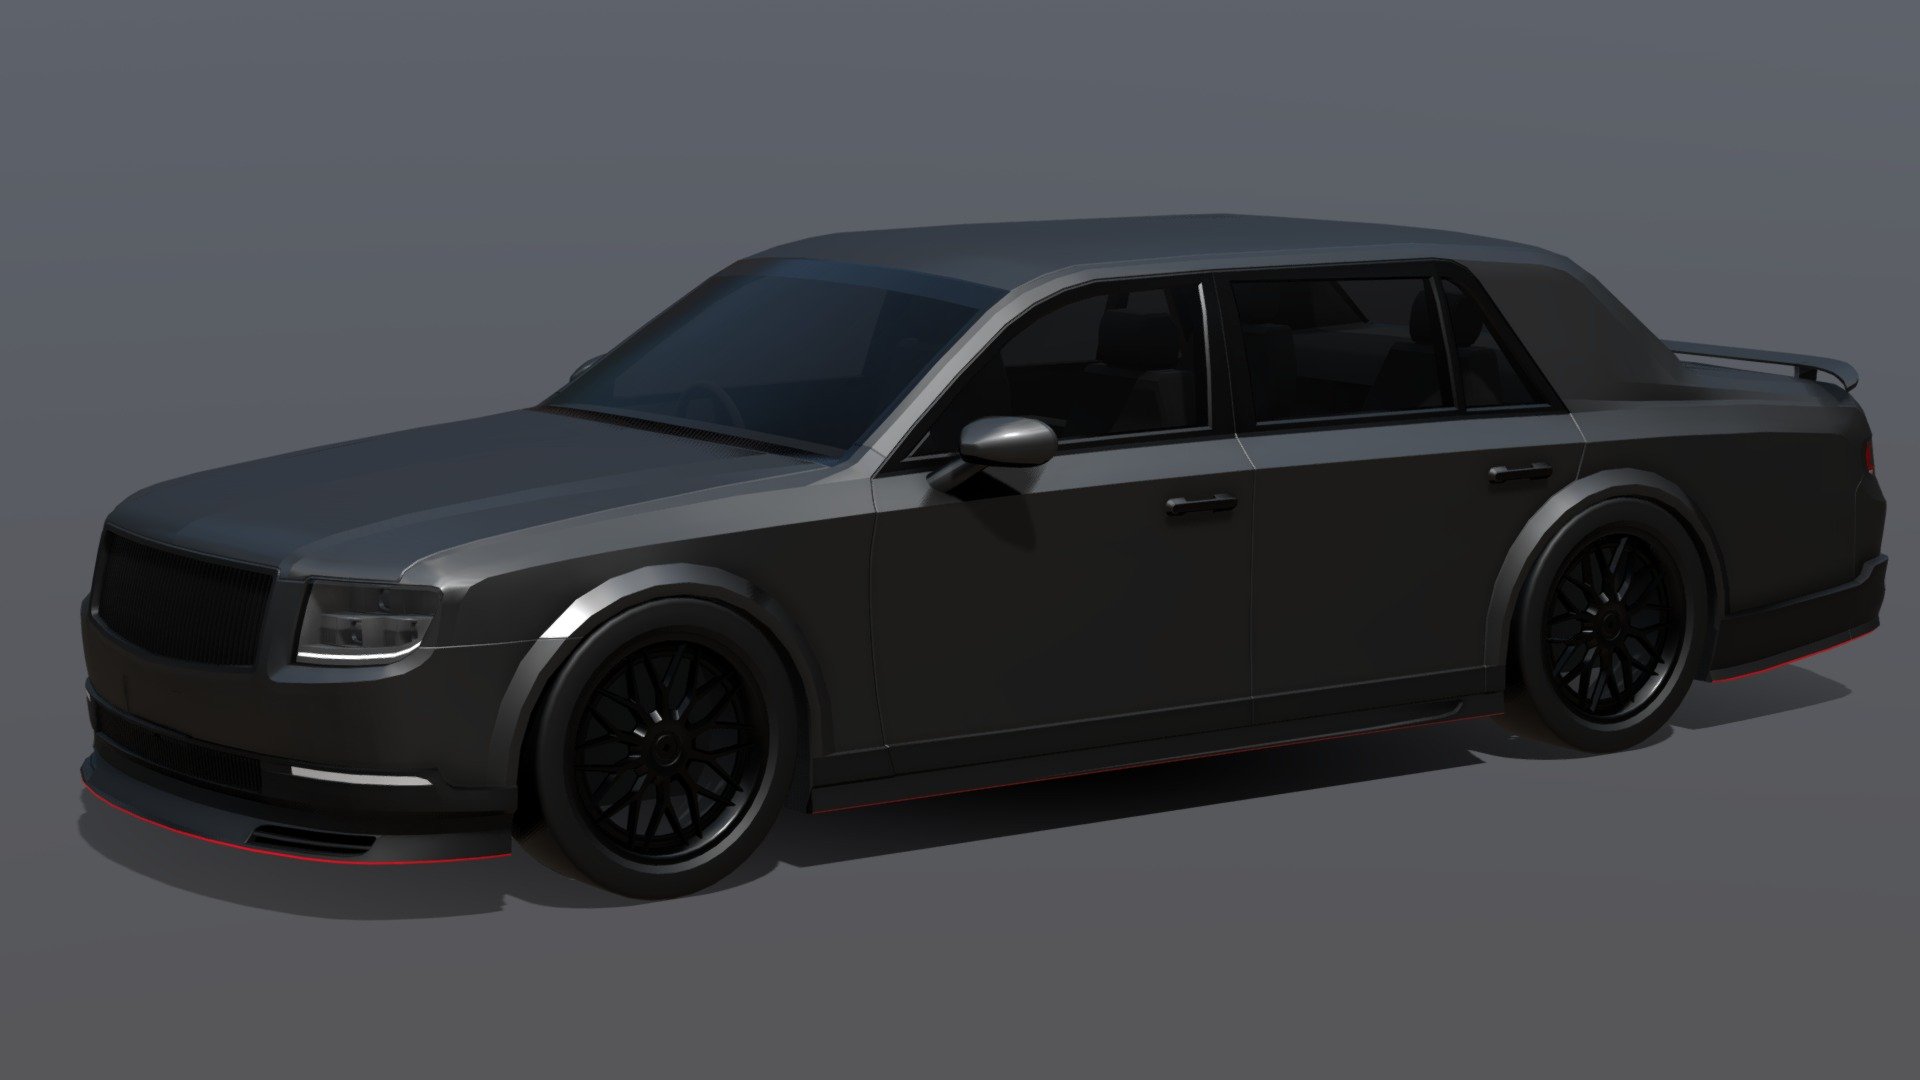 2018 Toyota Century custom edition I made a while back

meant to have a supercharged 1GZ V12 from the previous gen Century

quite cool - Custom 2022 Toyota Century V12 - Buy Royalty Free 3D model by veratech 3d model